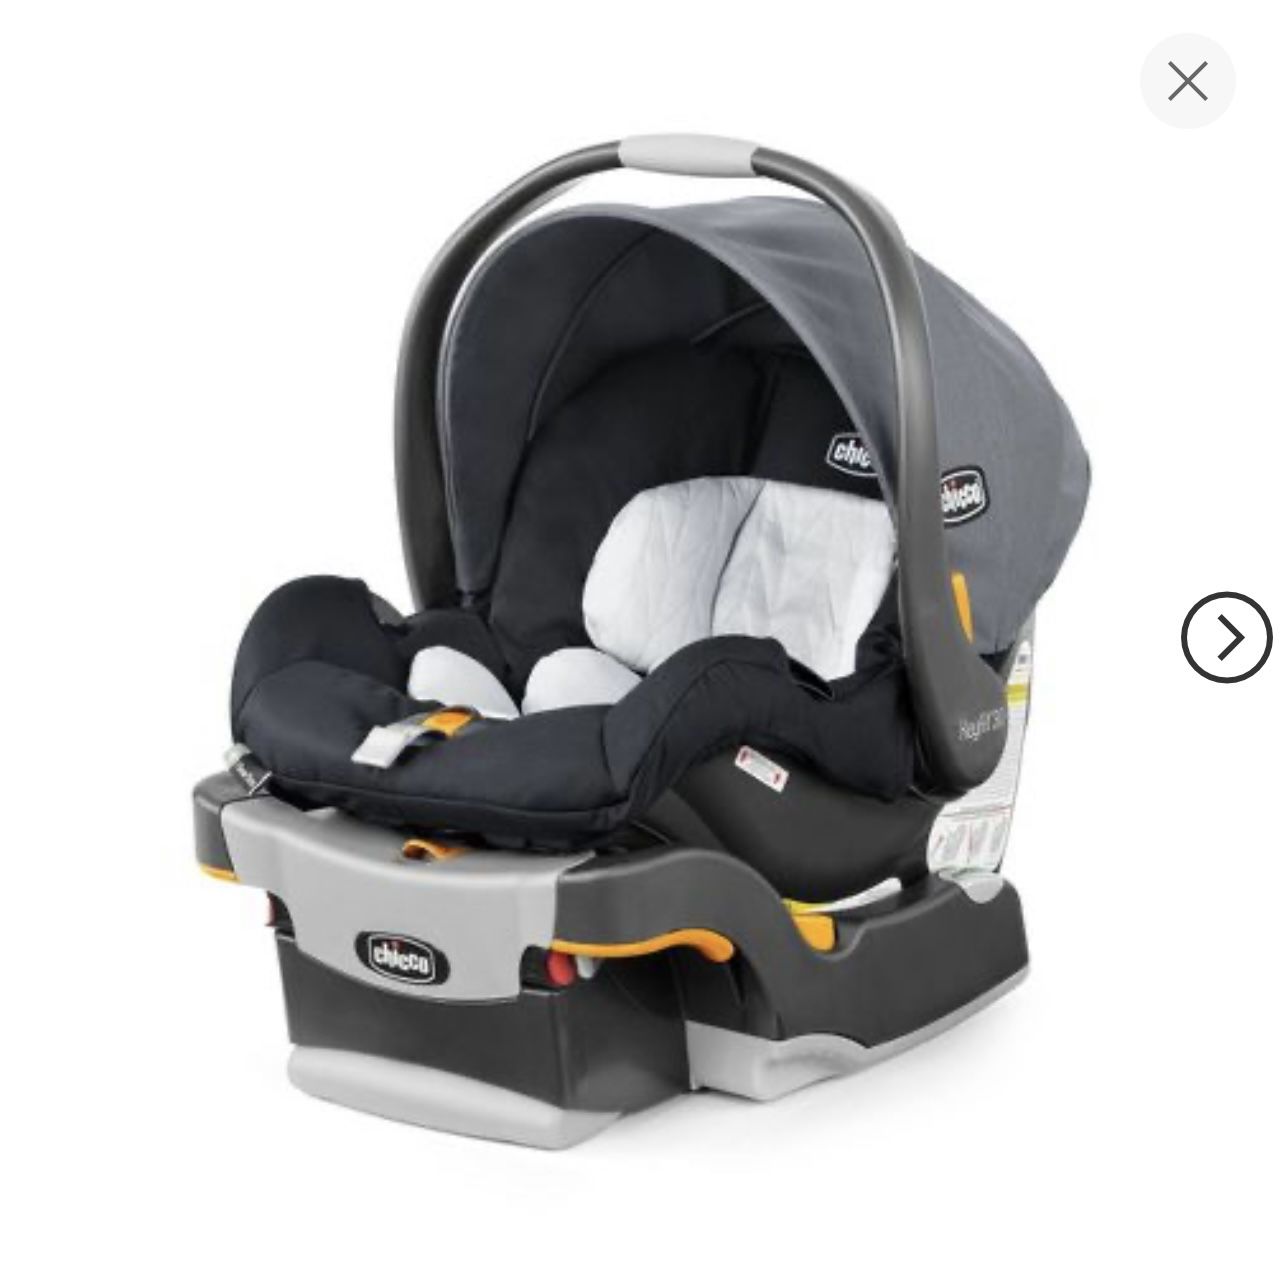 Chicco Infant Car Seat With Base. Gray In Color With Capacity Upto 30lb.